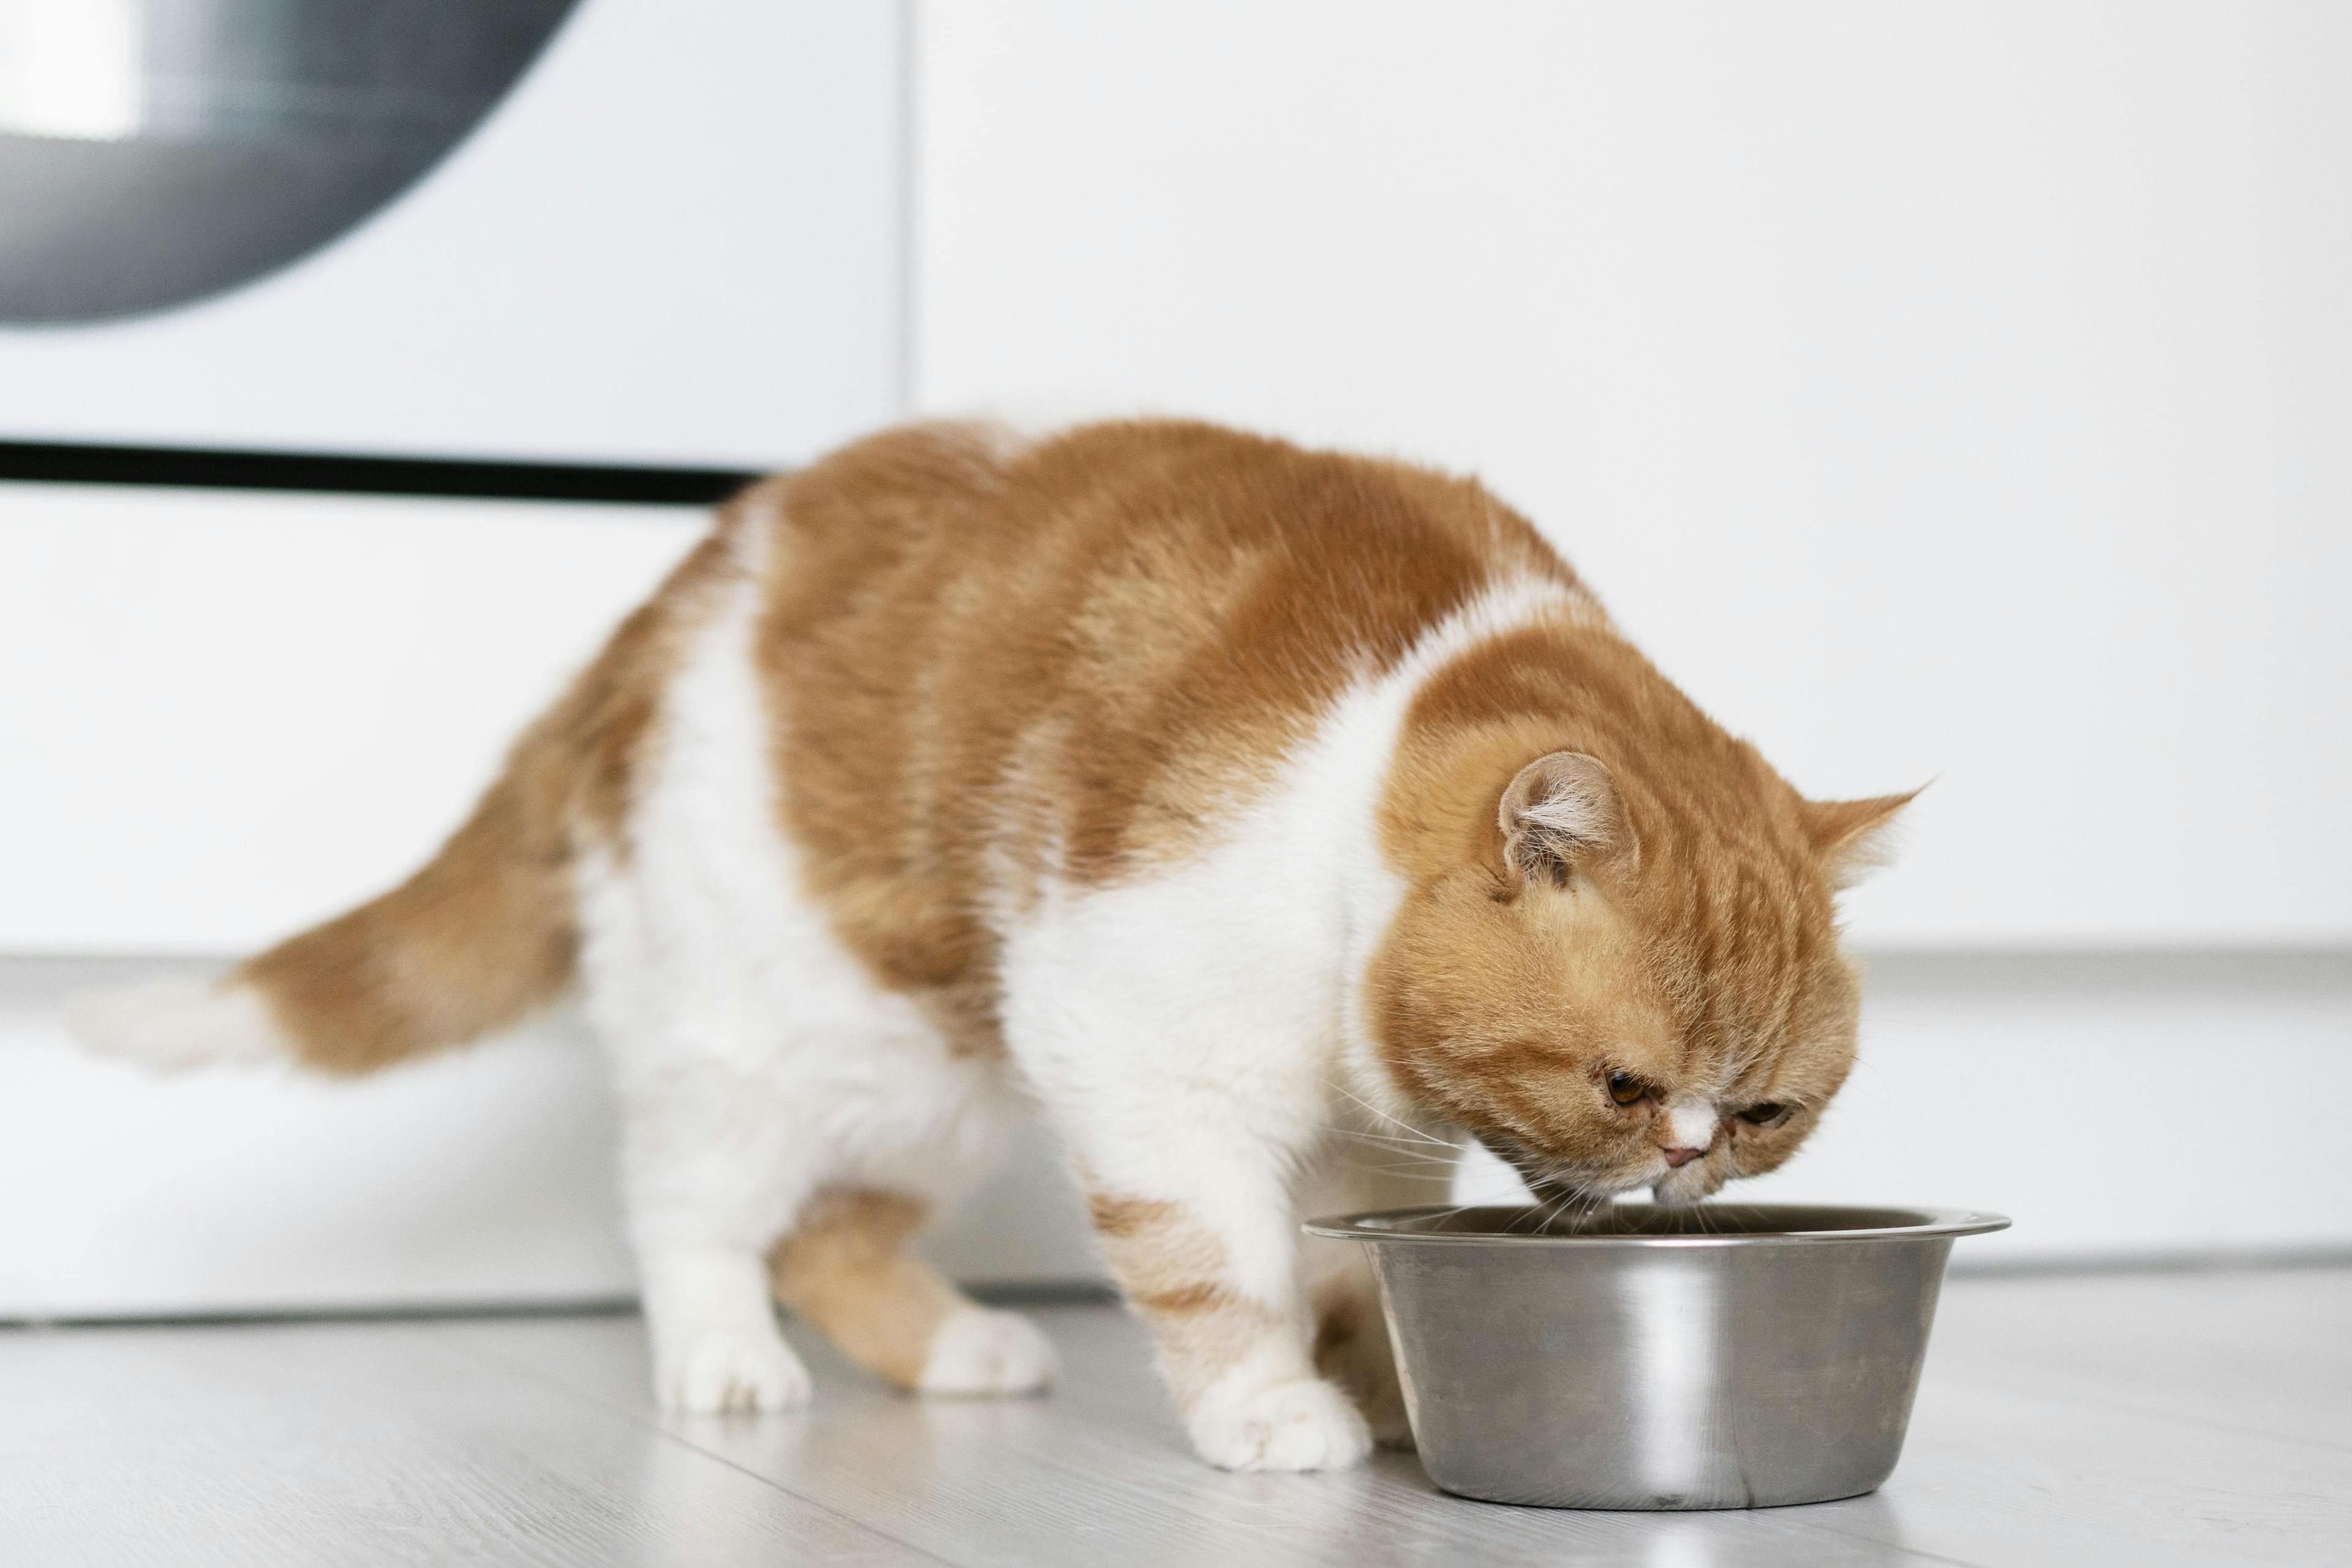 FeedingTime_Cats: A staff member serving nutritious and appetizing meals to the cats during their stay